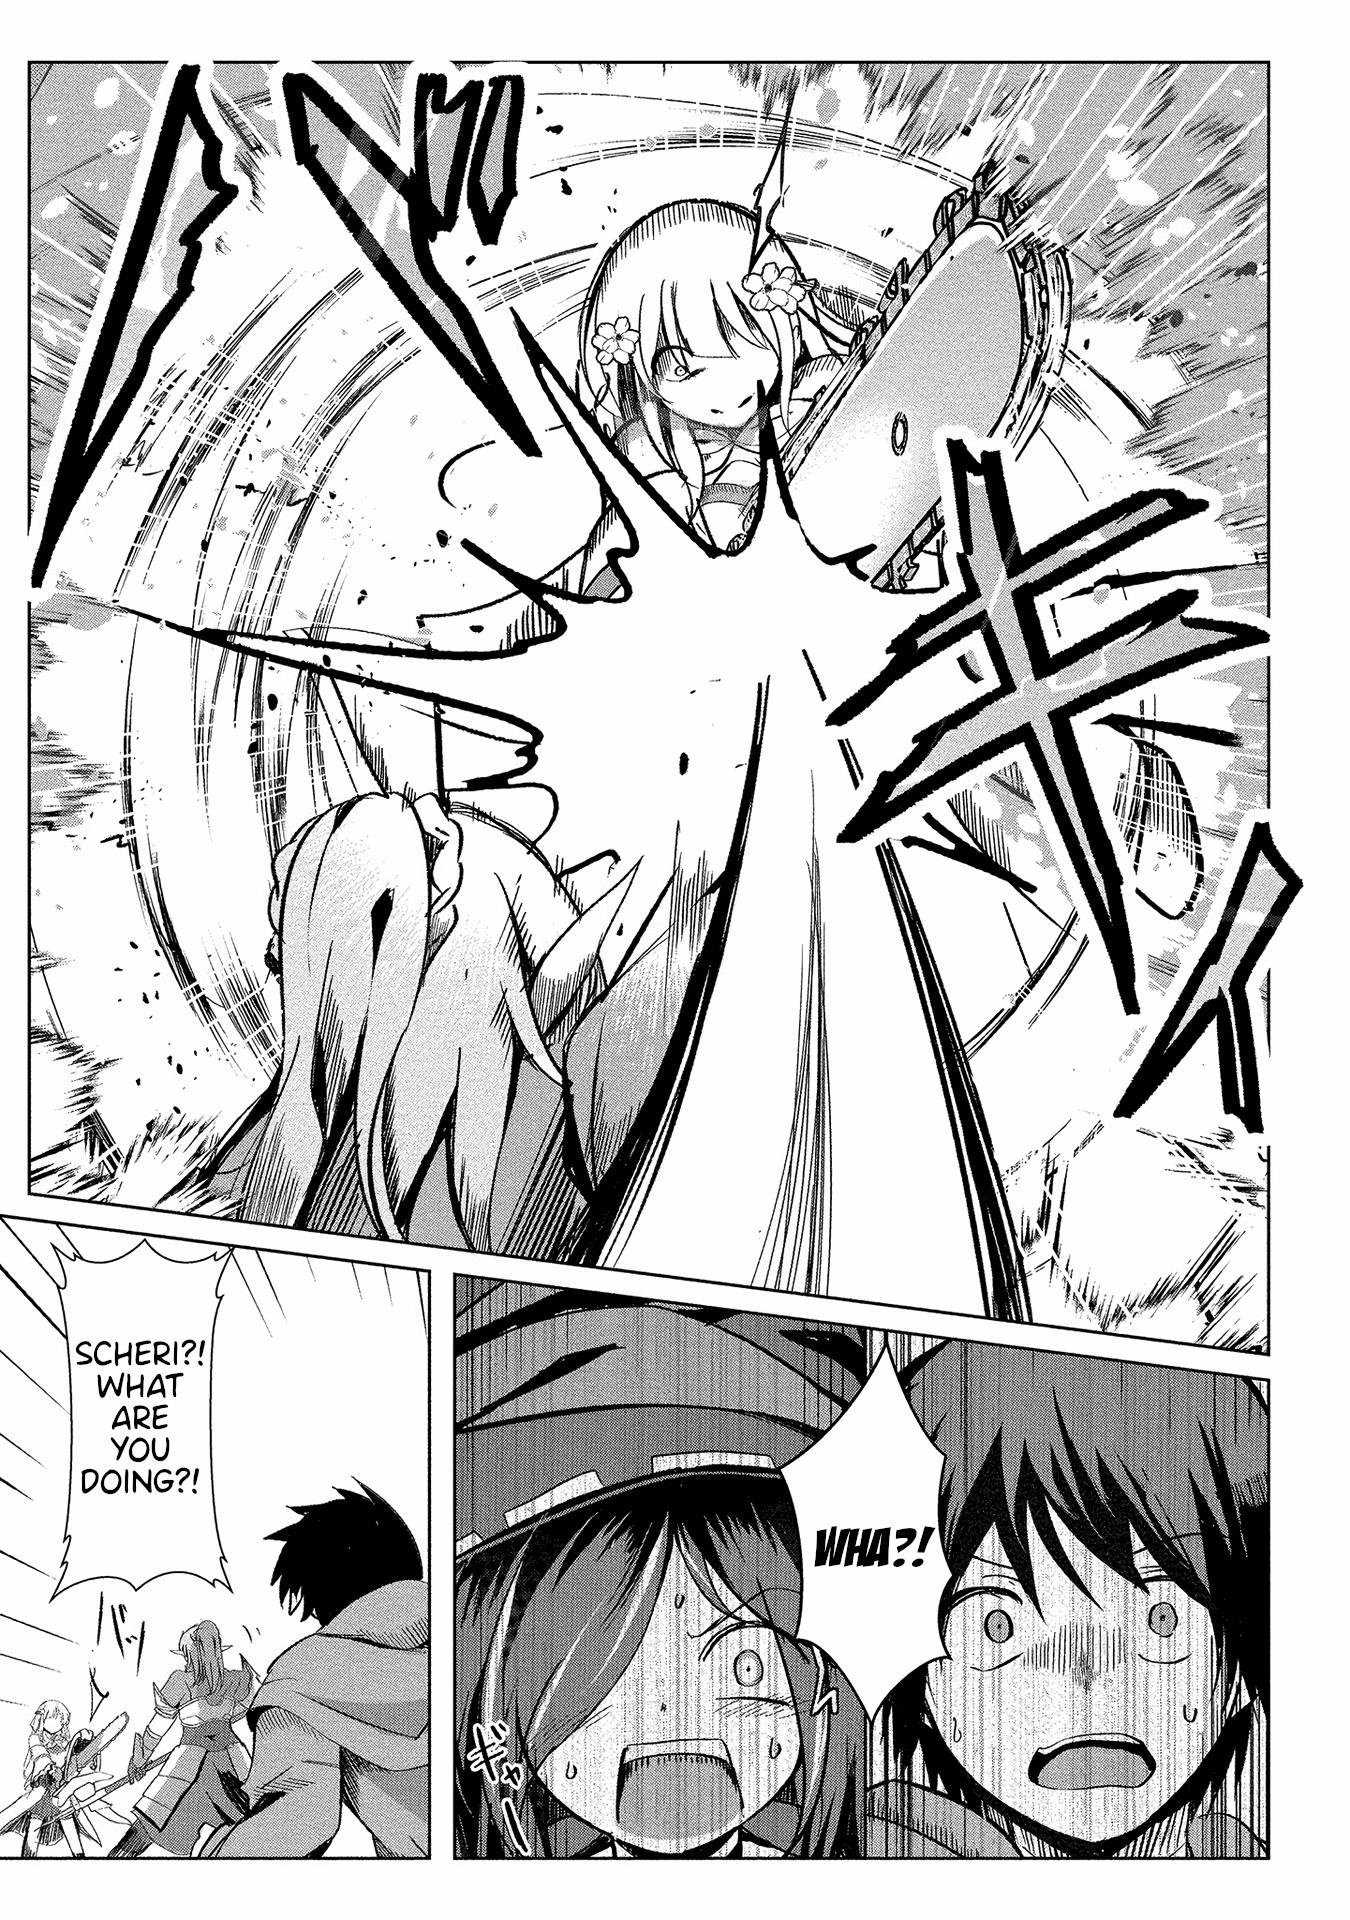 Dunking On Succubi In Another World Vol.2 Chapter 10: Ol' Tentacles And I In Another World! - Picture 3